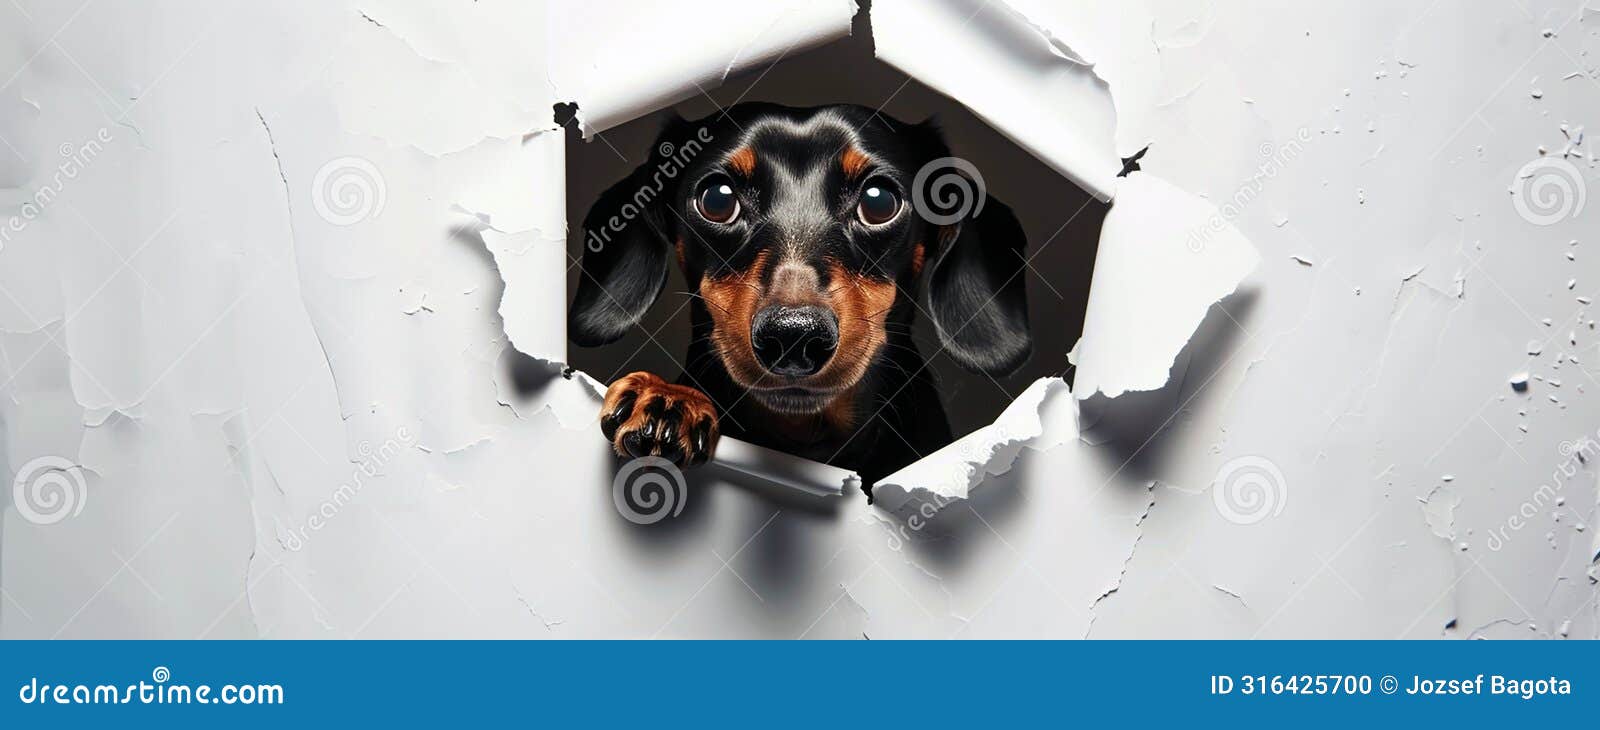 a happy cute dachshund dog rips a round hole through a white paper wall and peeps through the hole. focus on the eyes of the dog